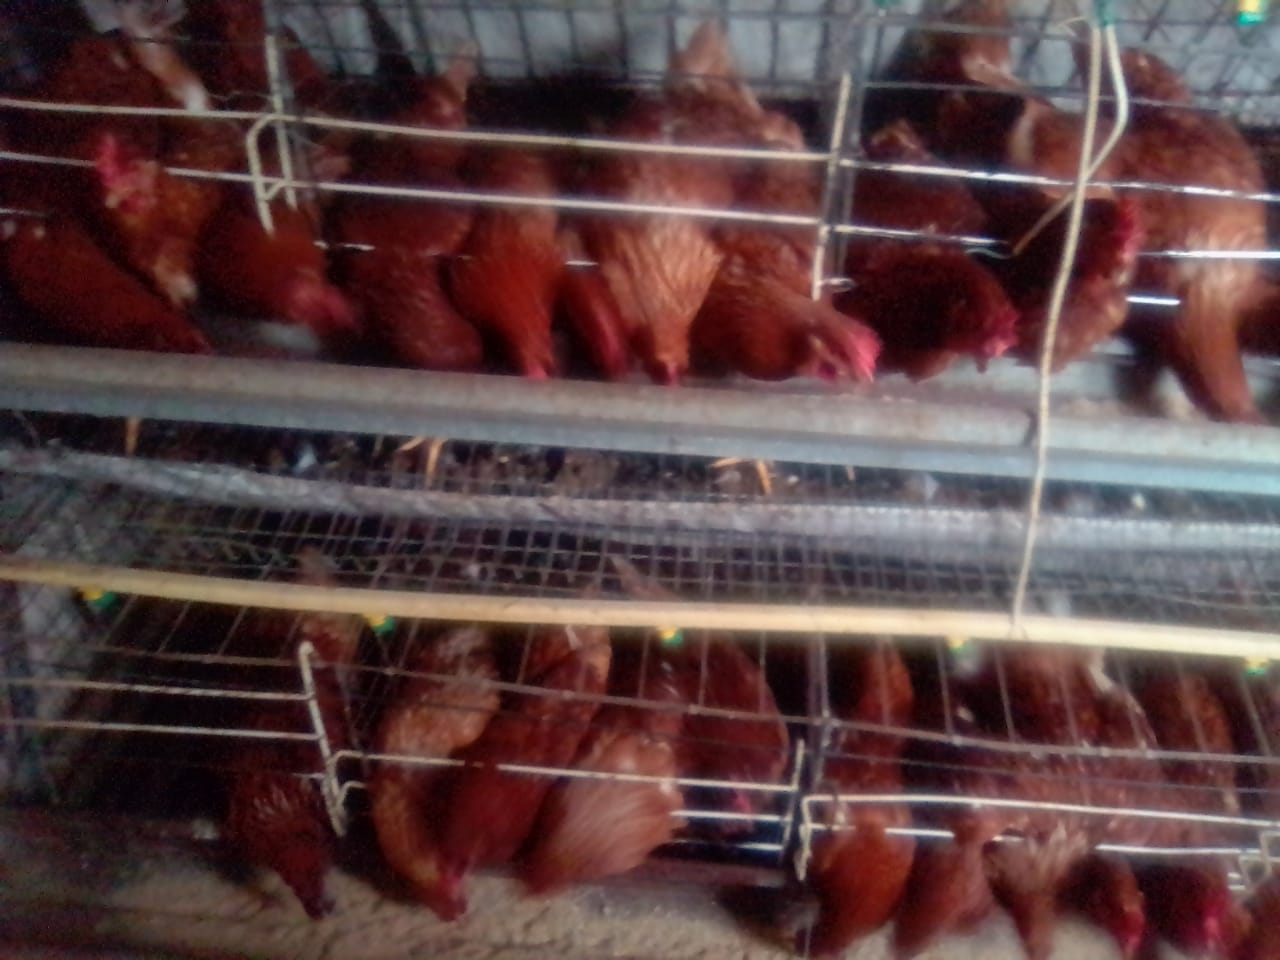 Layer cage with 197 (27 weeks old) Lohmann brown chickens. 